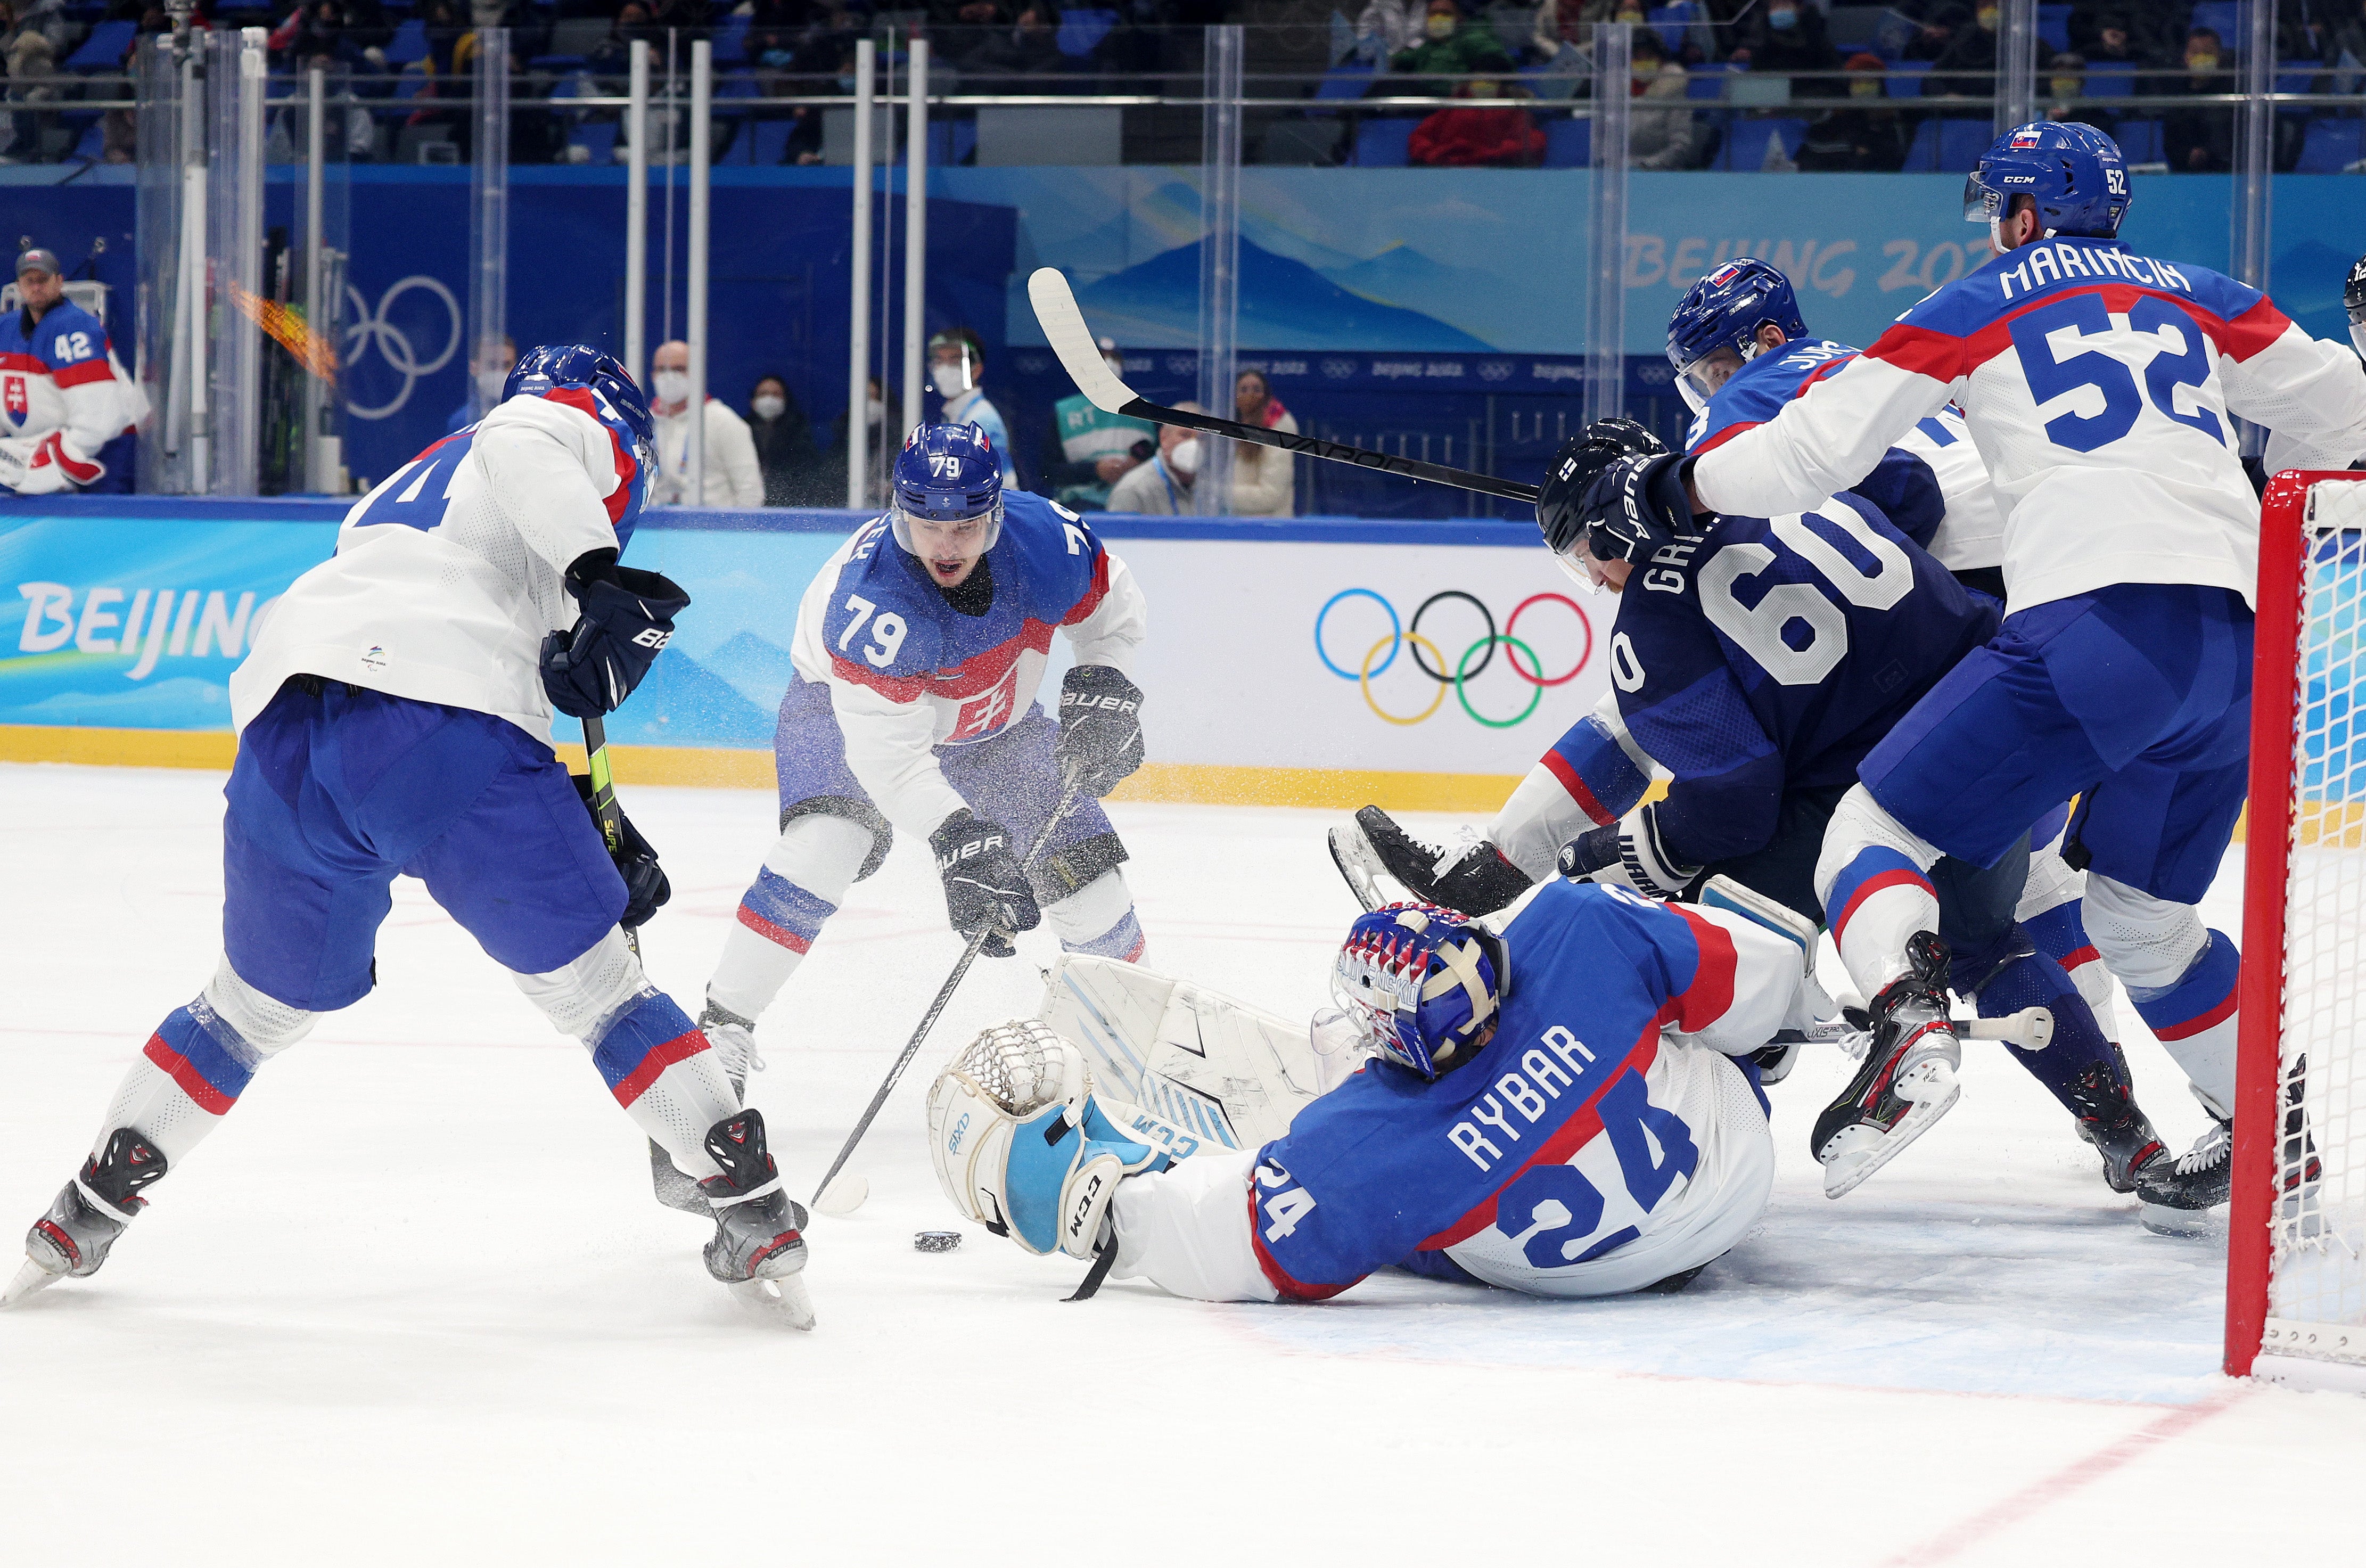 Finland play against Slovakia during men’s ice hockey splayoff semifinal match on day 14